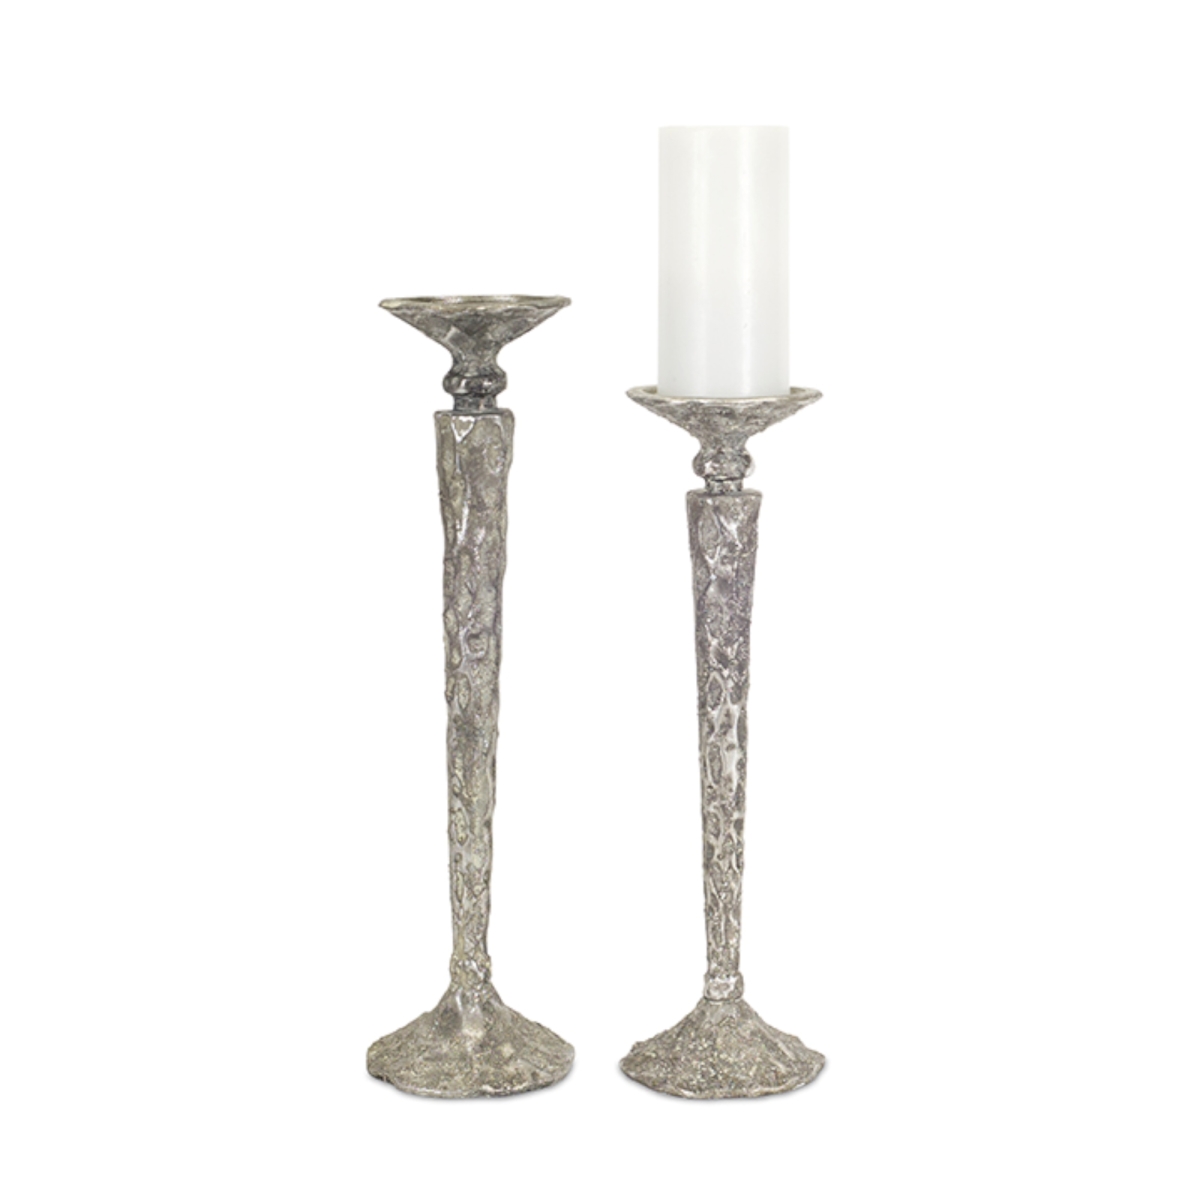 72654ds 17-19 In. Poly Stone Candle Holder, Silver & White - Set Of 2